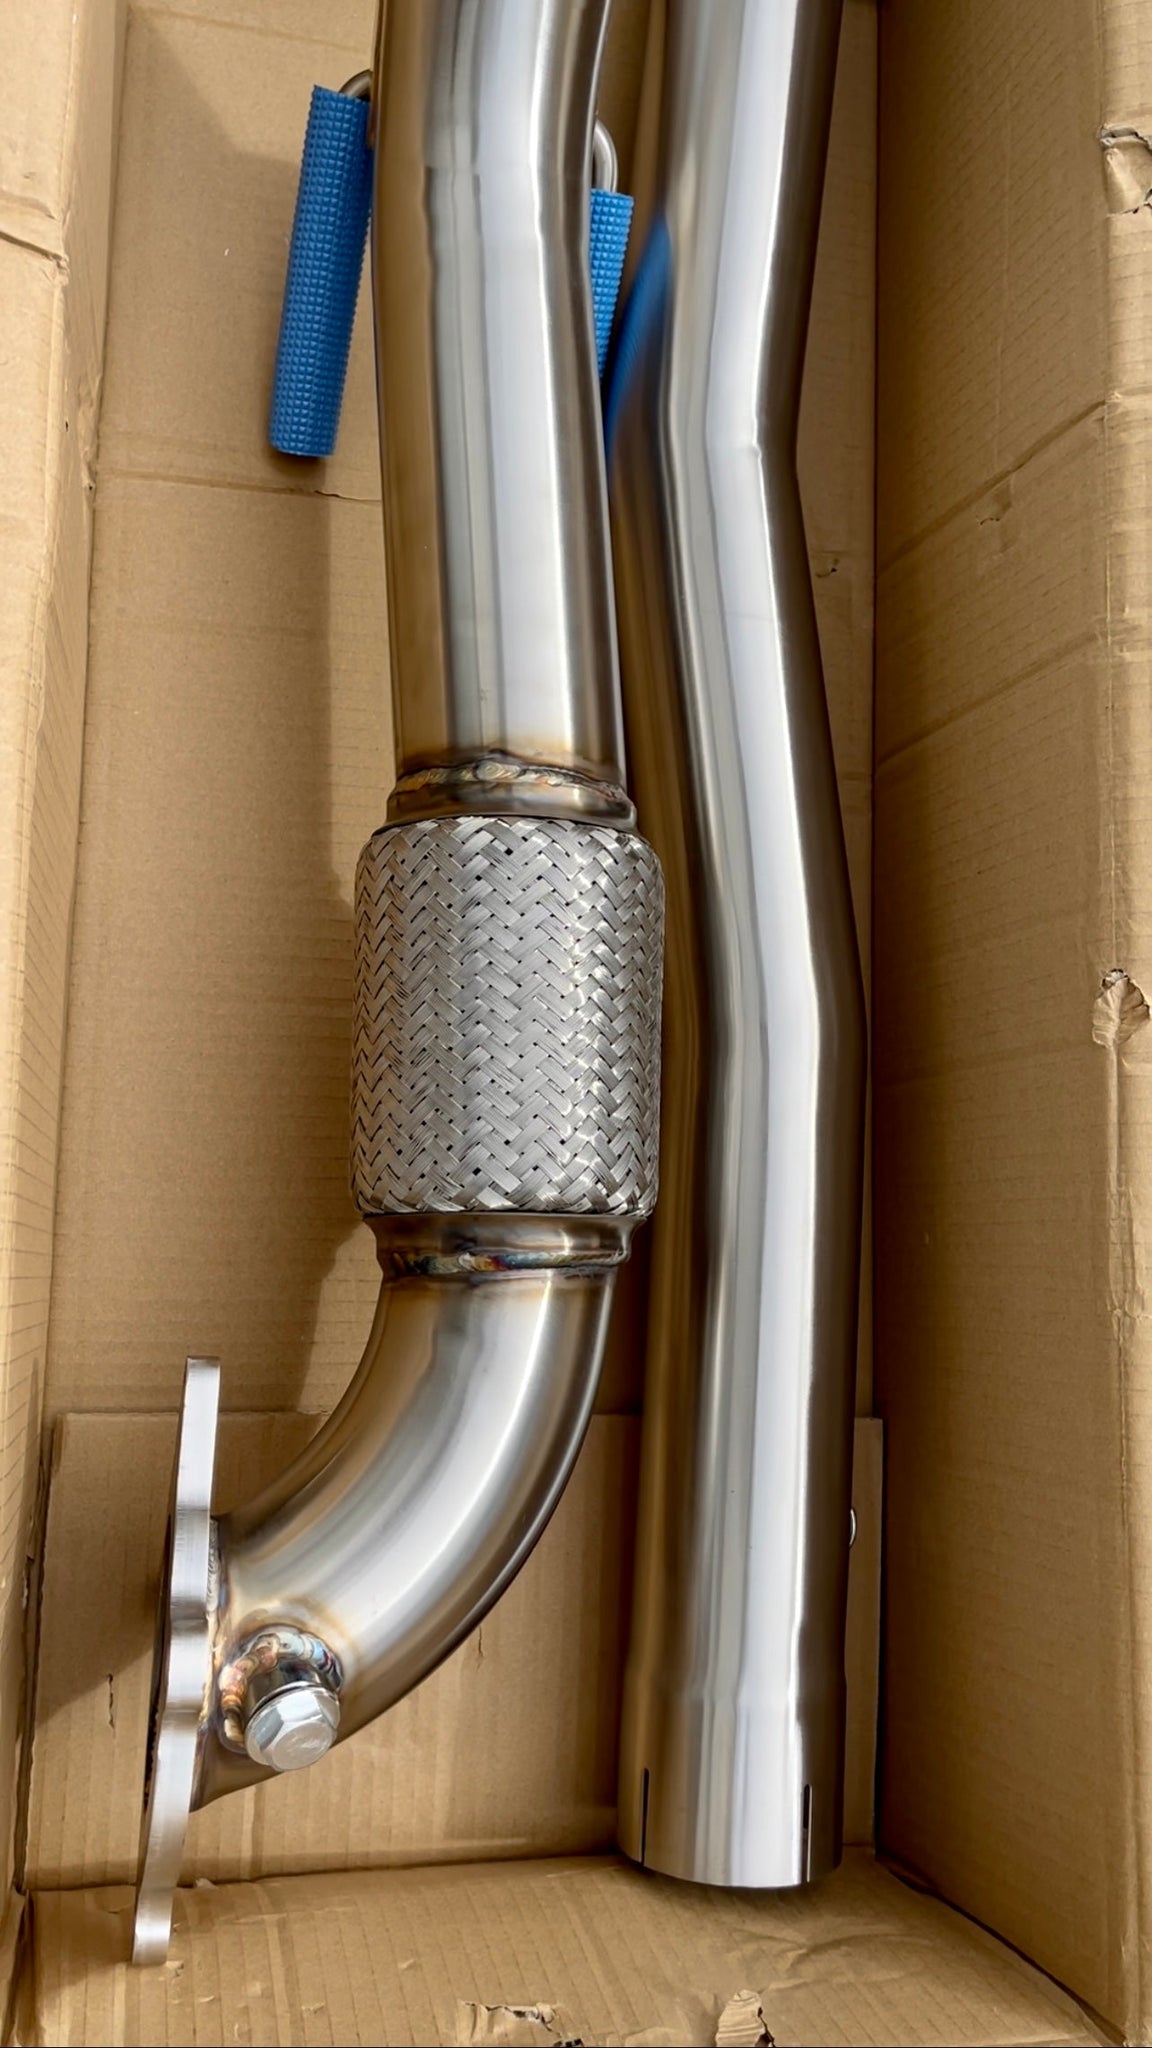 ** SPECIAL** KCP Stainless Decat Downpipe Suit For VW Golf MK5 MK6 GTI Audi A3 8P 2.0T 1.8T Exhaust